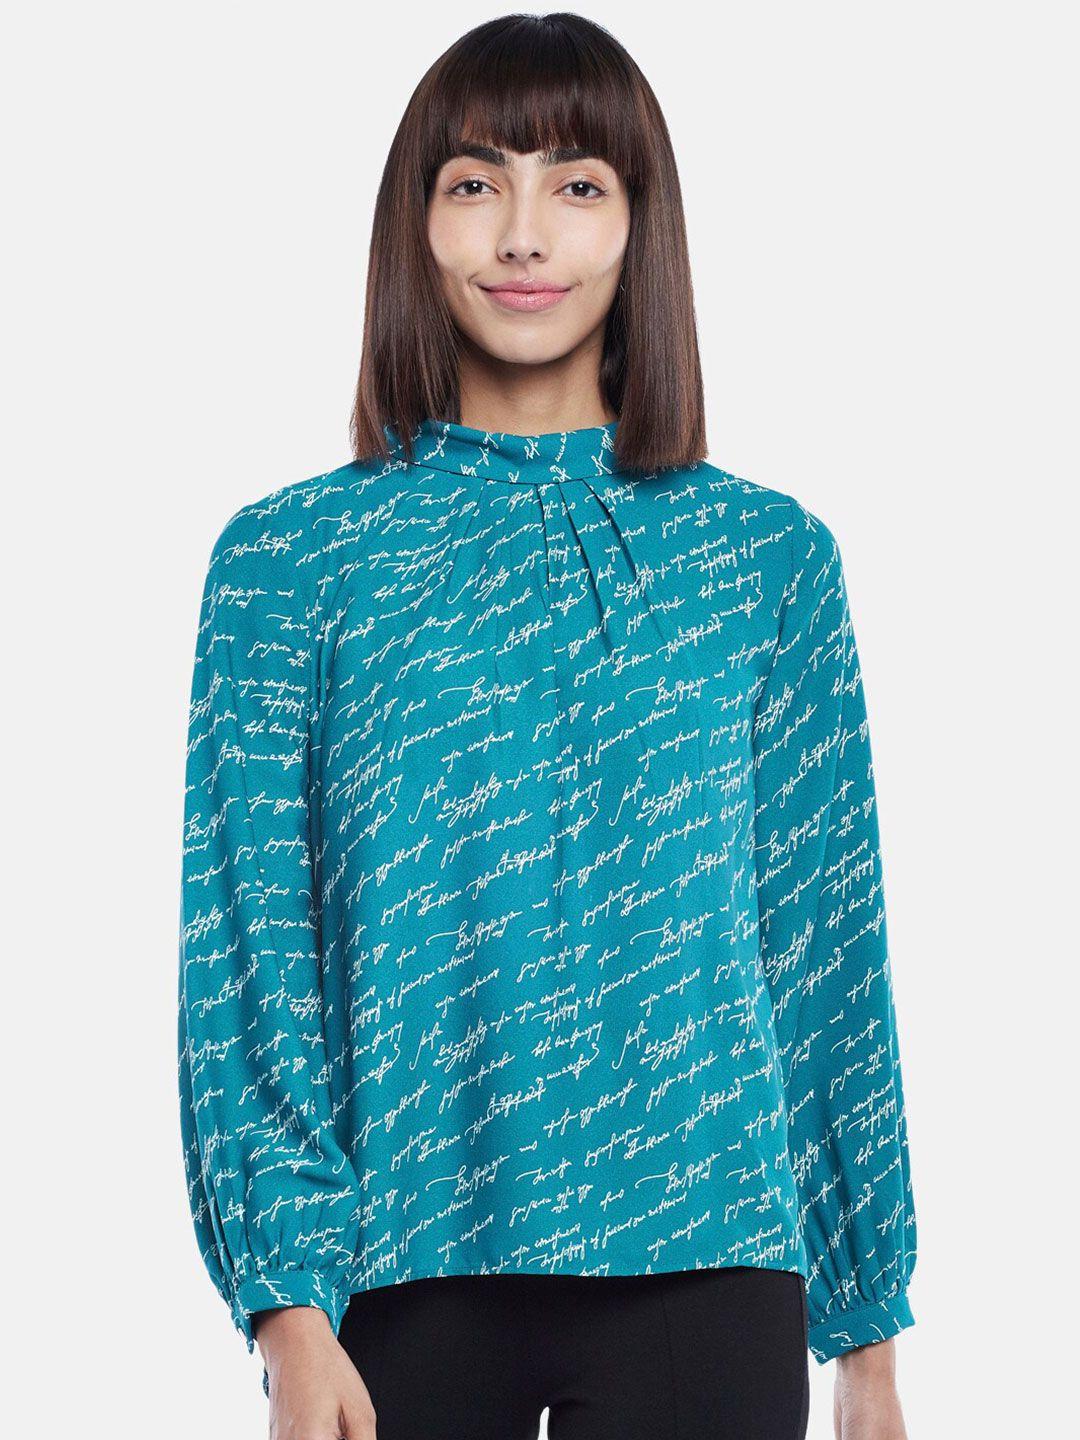 annabelle by pantaloons teal blue & white print top